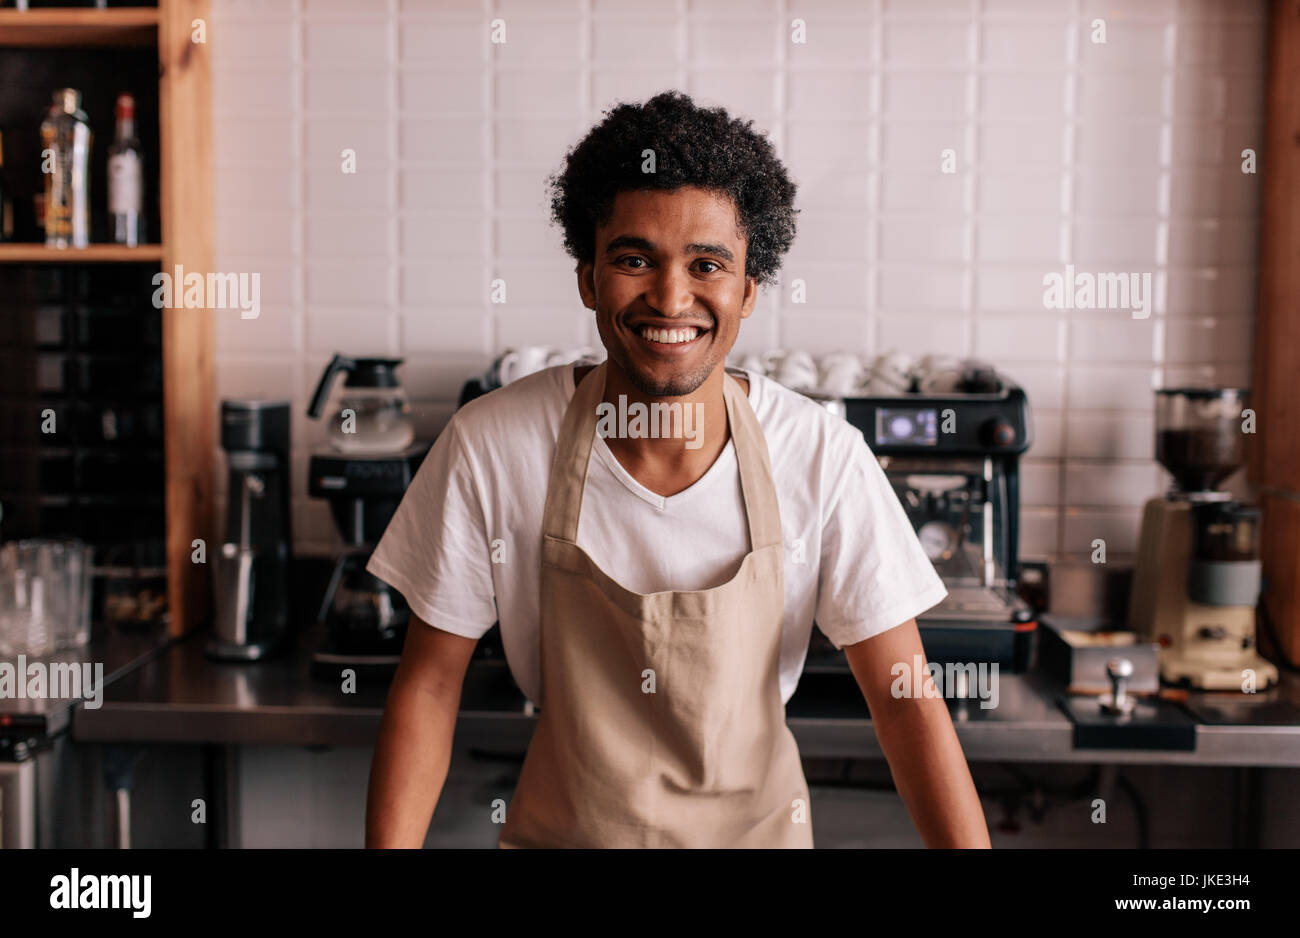 Portrait of happy young barista standing at cafe counter. African man in apron looking at camera and smiling. Stock Photo